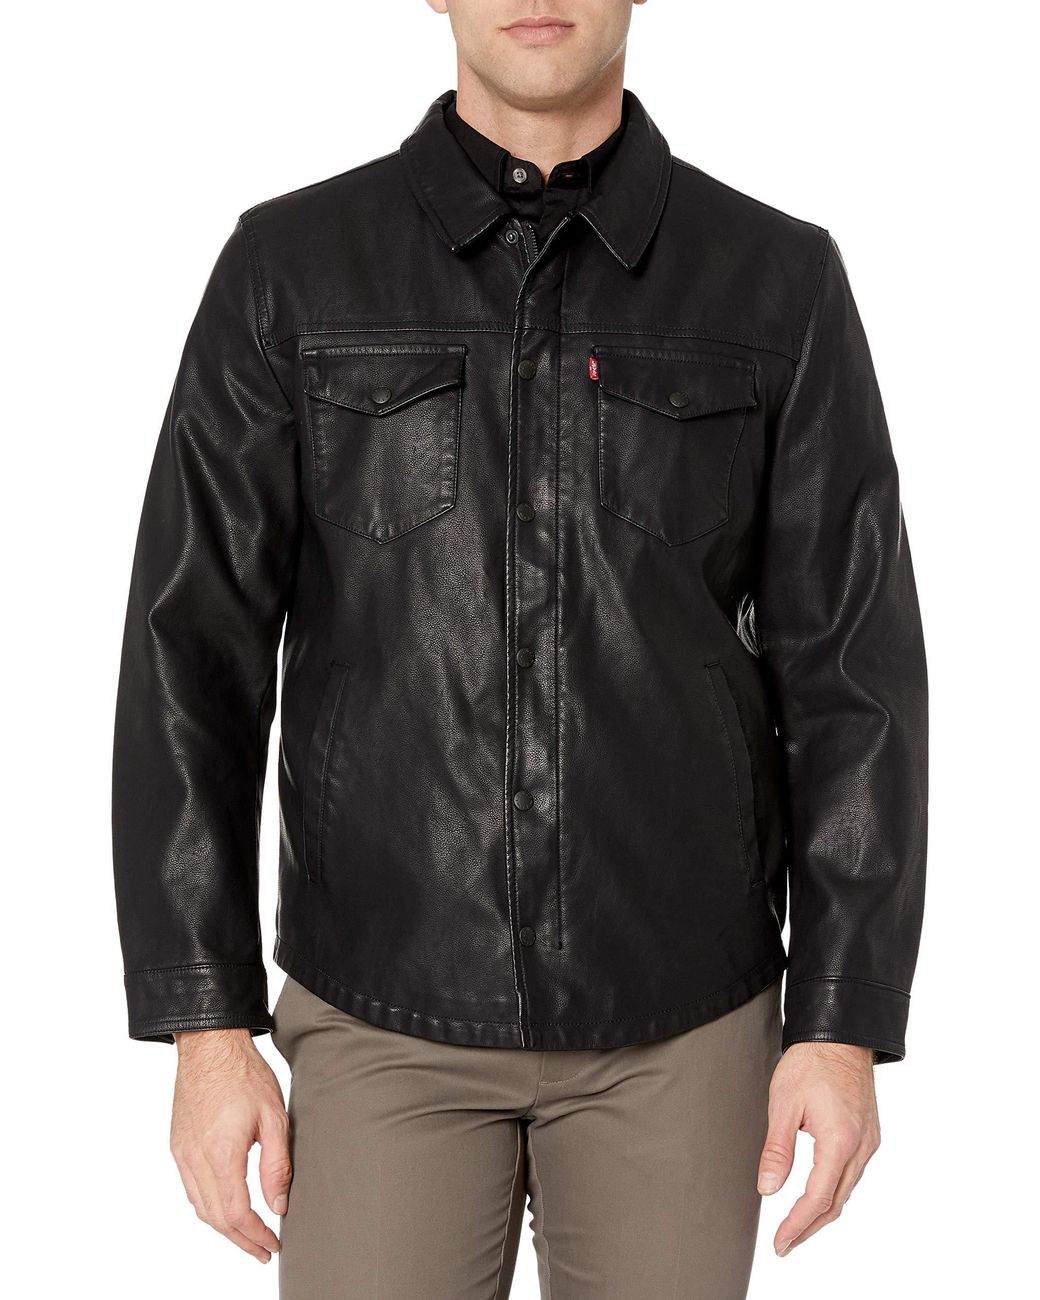 Levi's Lamb Touch Faux Leather Shirt Jacket in Black for Men - Save 12% ...